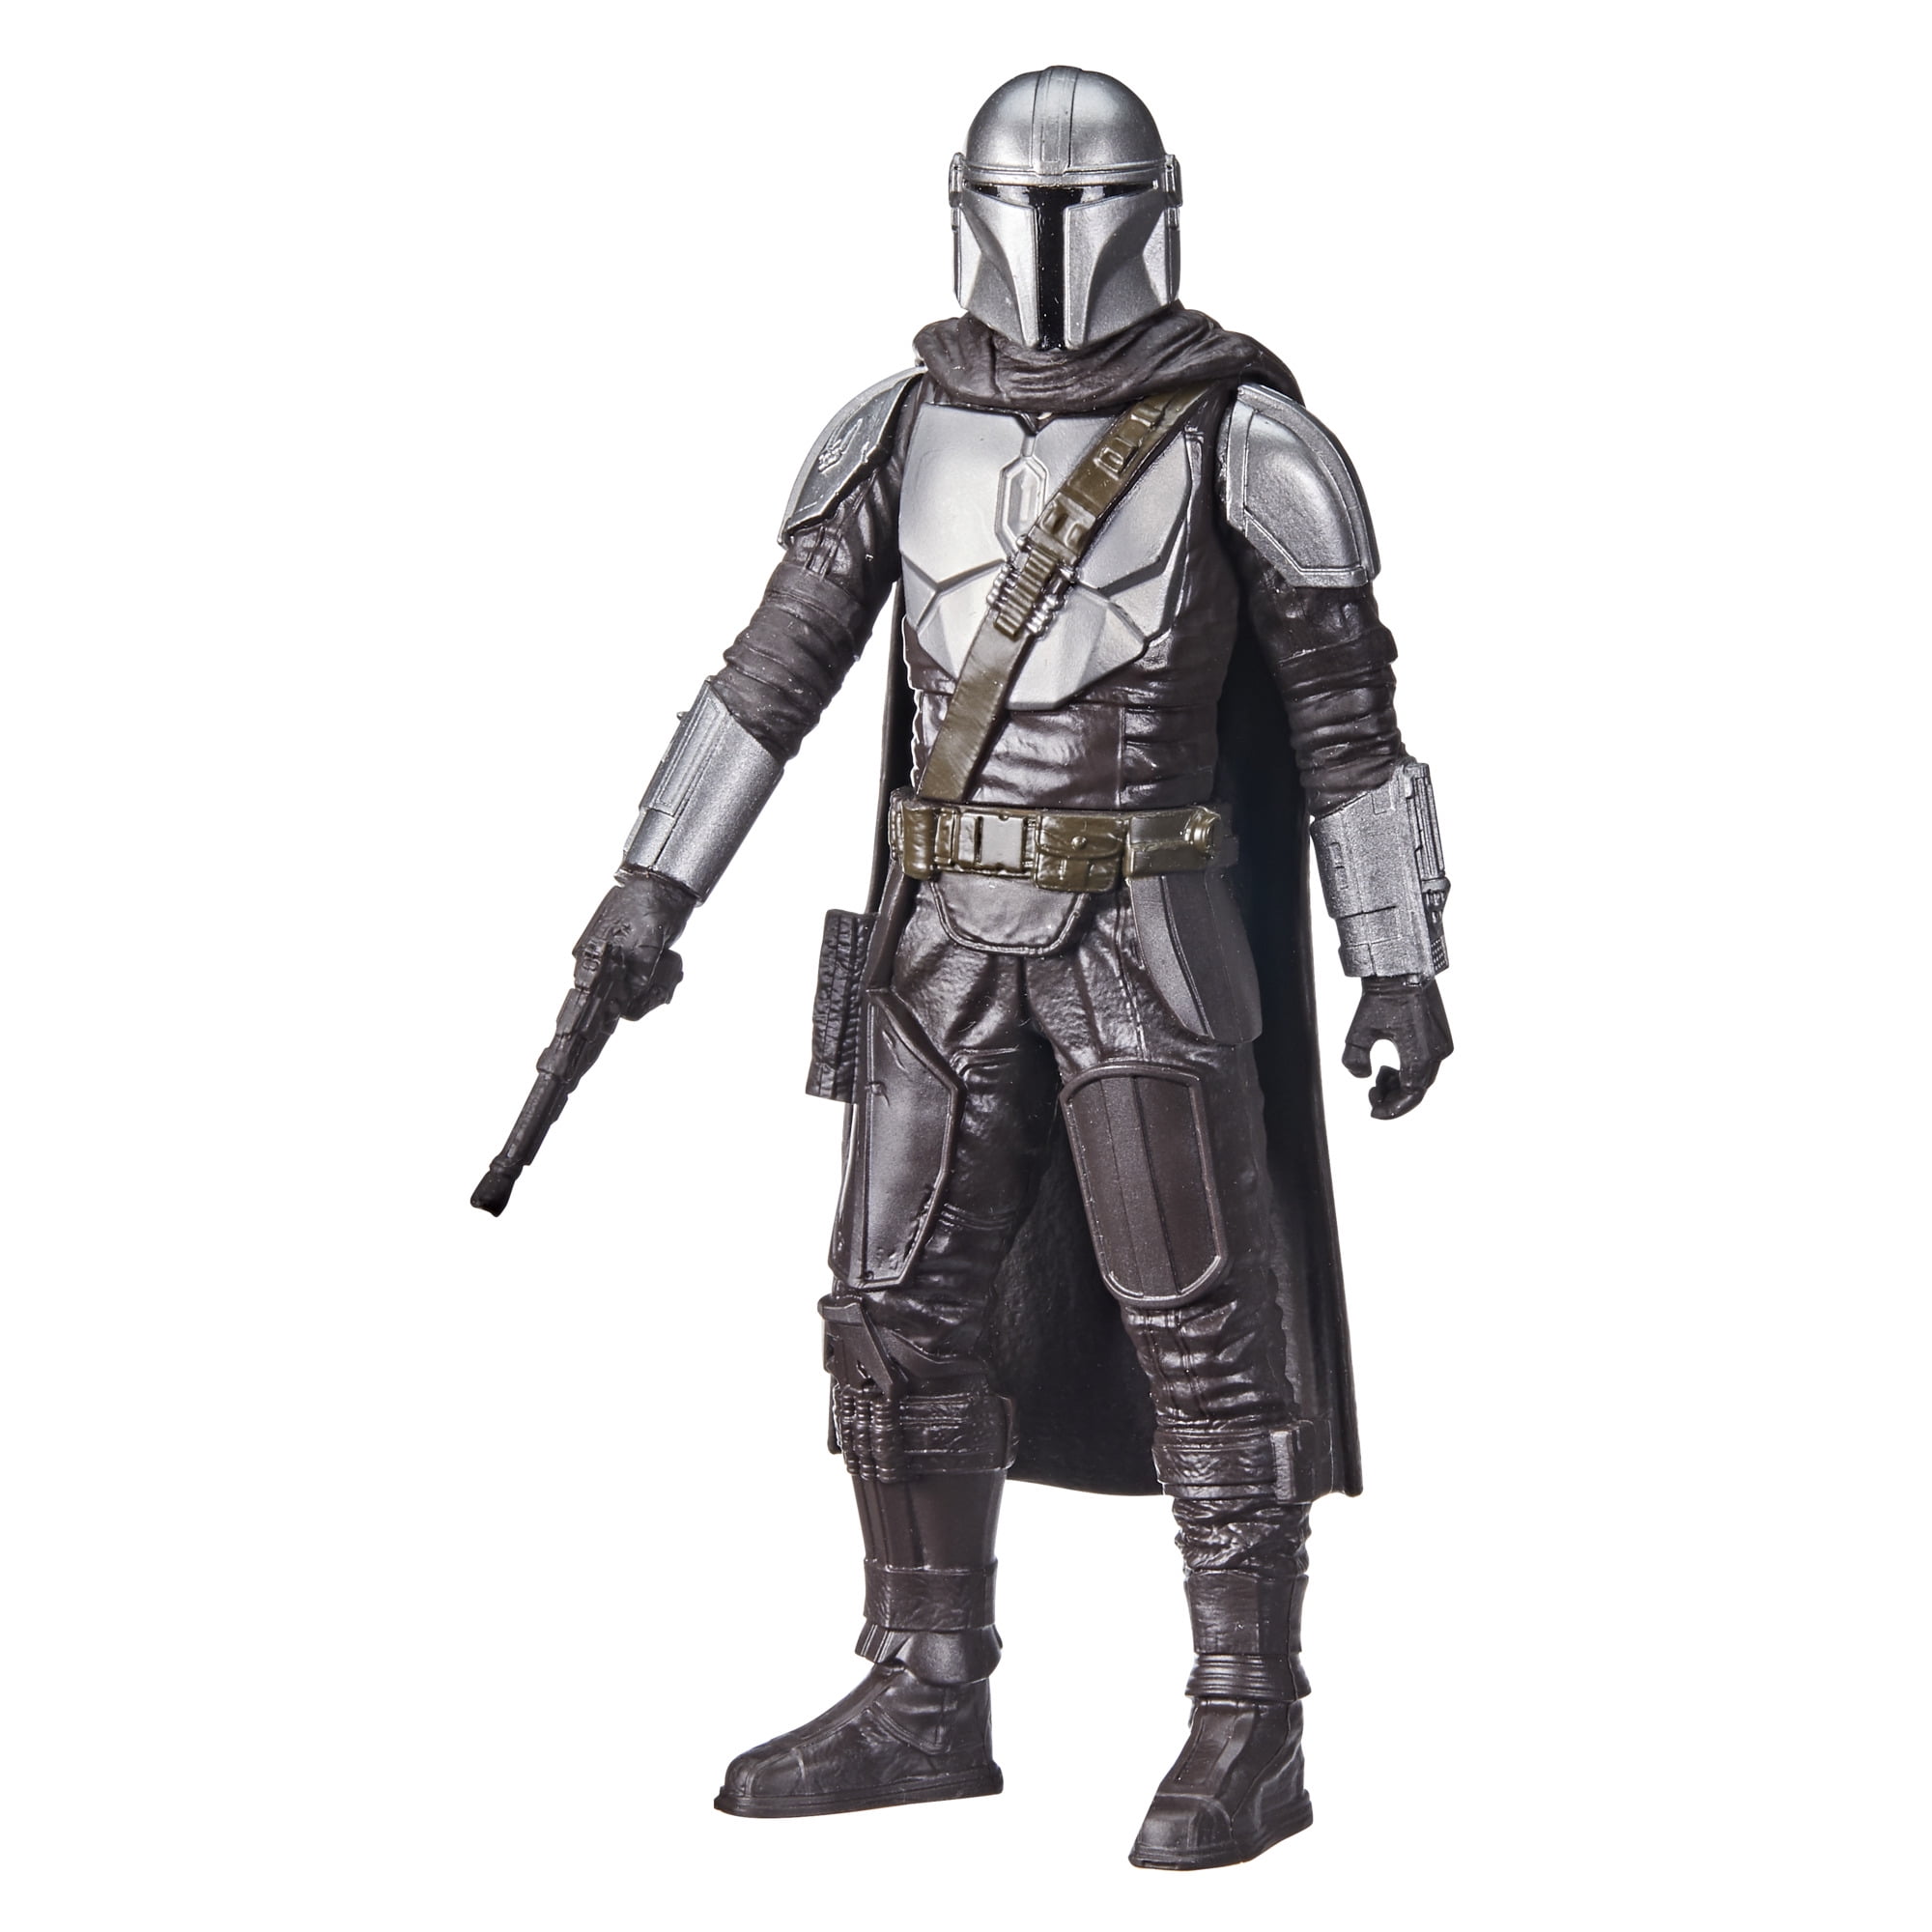 Details about   Star Wars Black Series Collection The Mandalorian Toy 6" Action Figure Doll Gift 